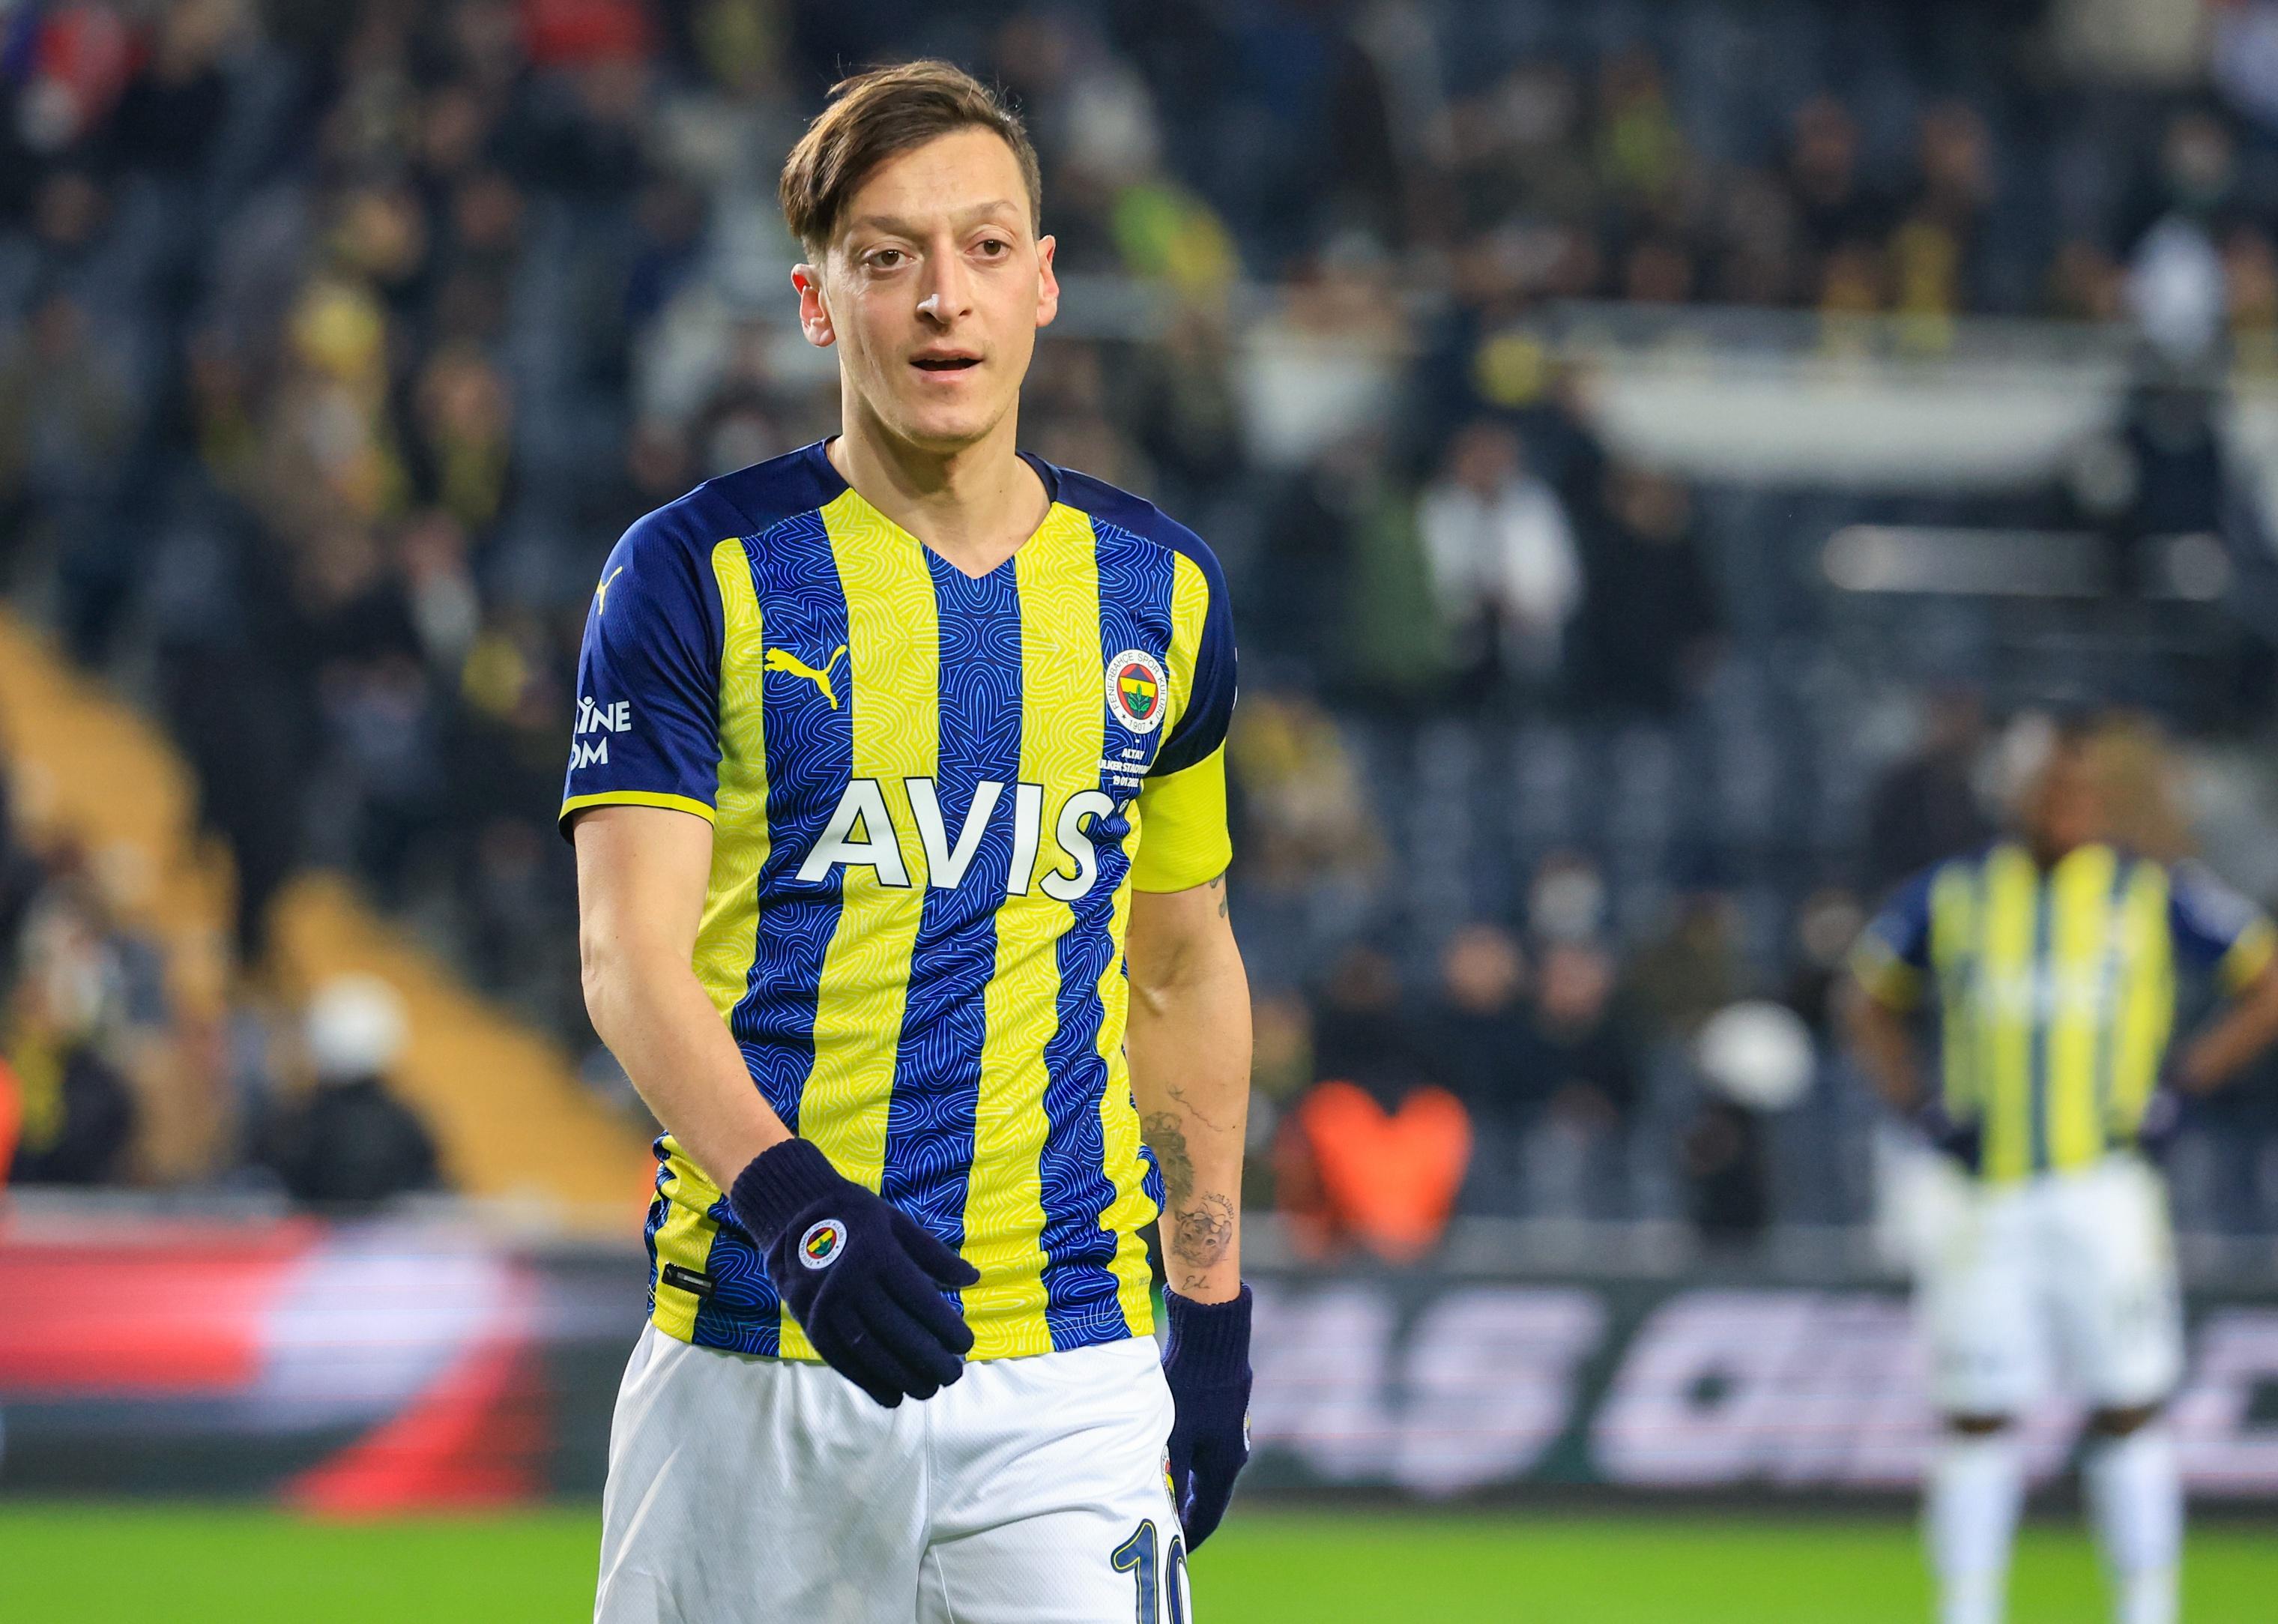 Mesut Ozil of Fenerbahce SK during the Super Lig match between Fenerbahce and Altay